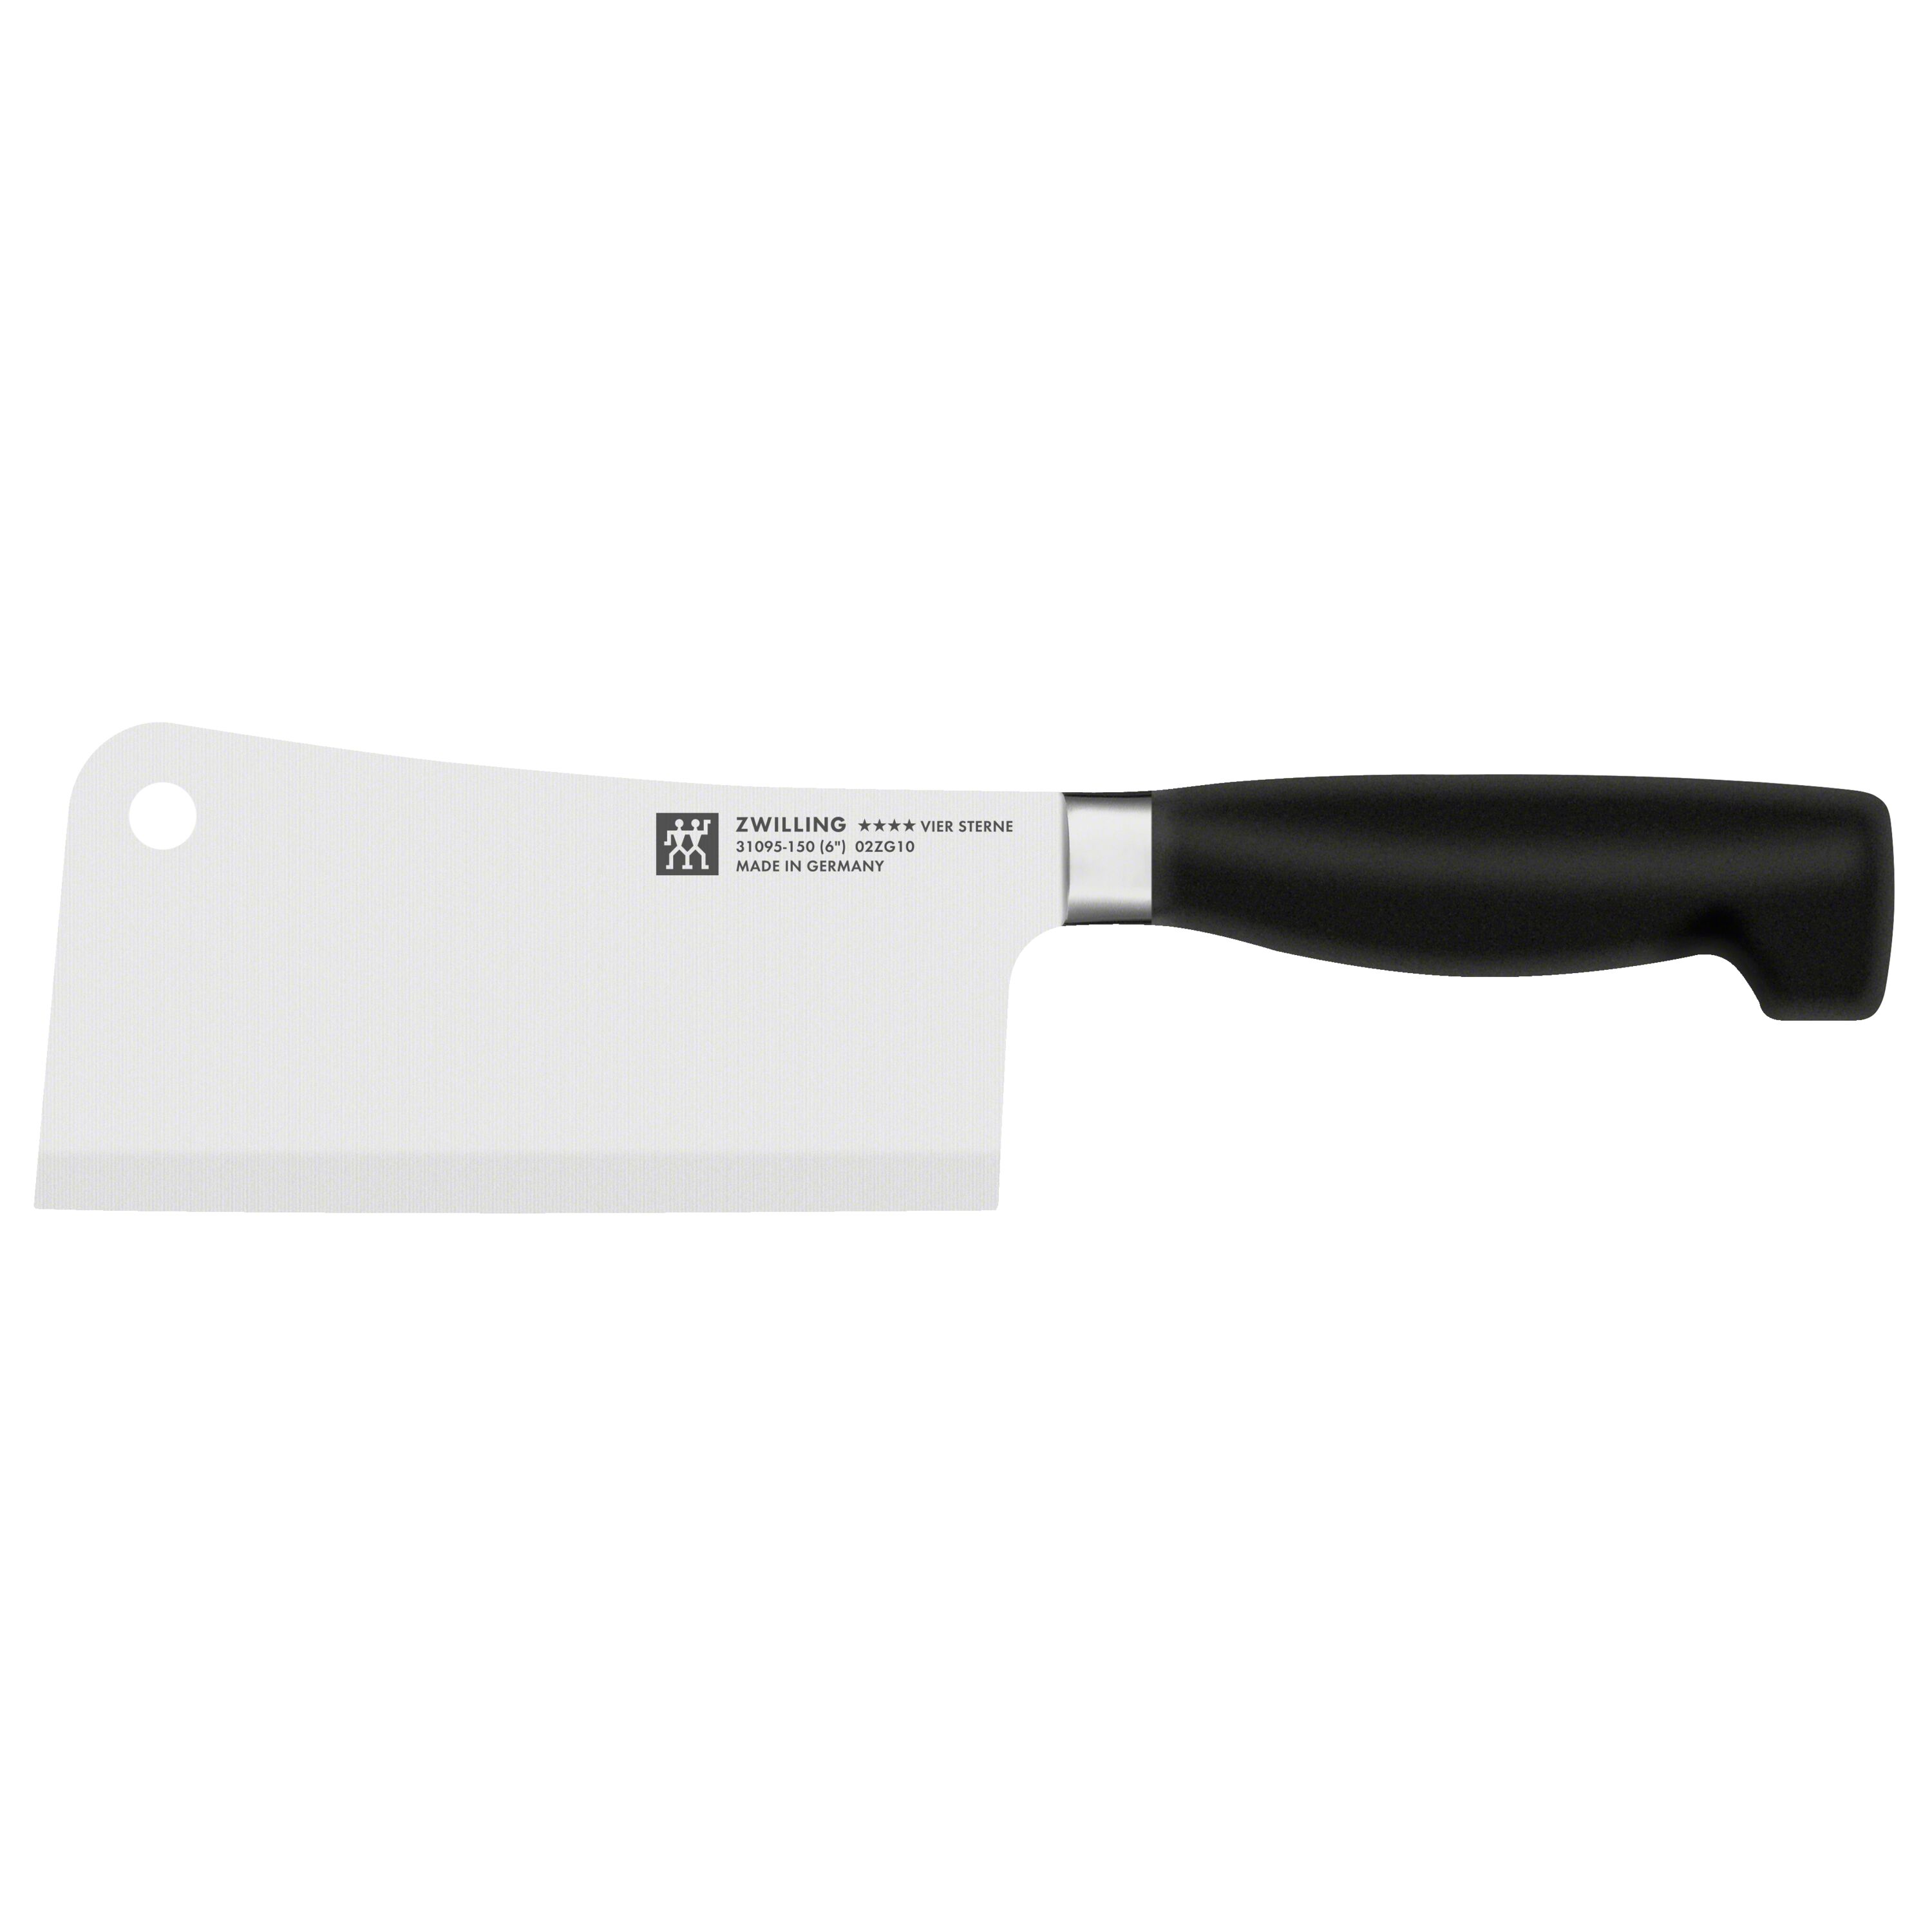 2-in-1 Smart Cutter, Stainless Steel Knife with Cutting Board, Cleve